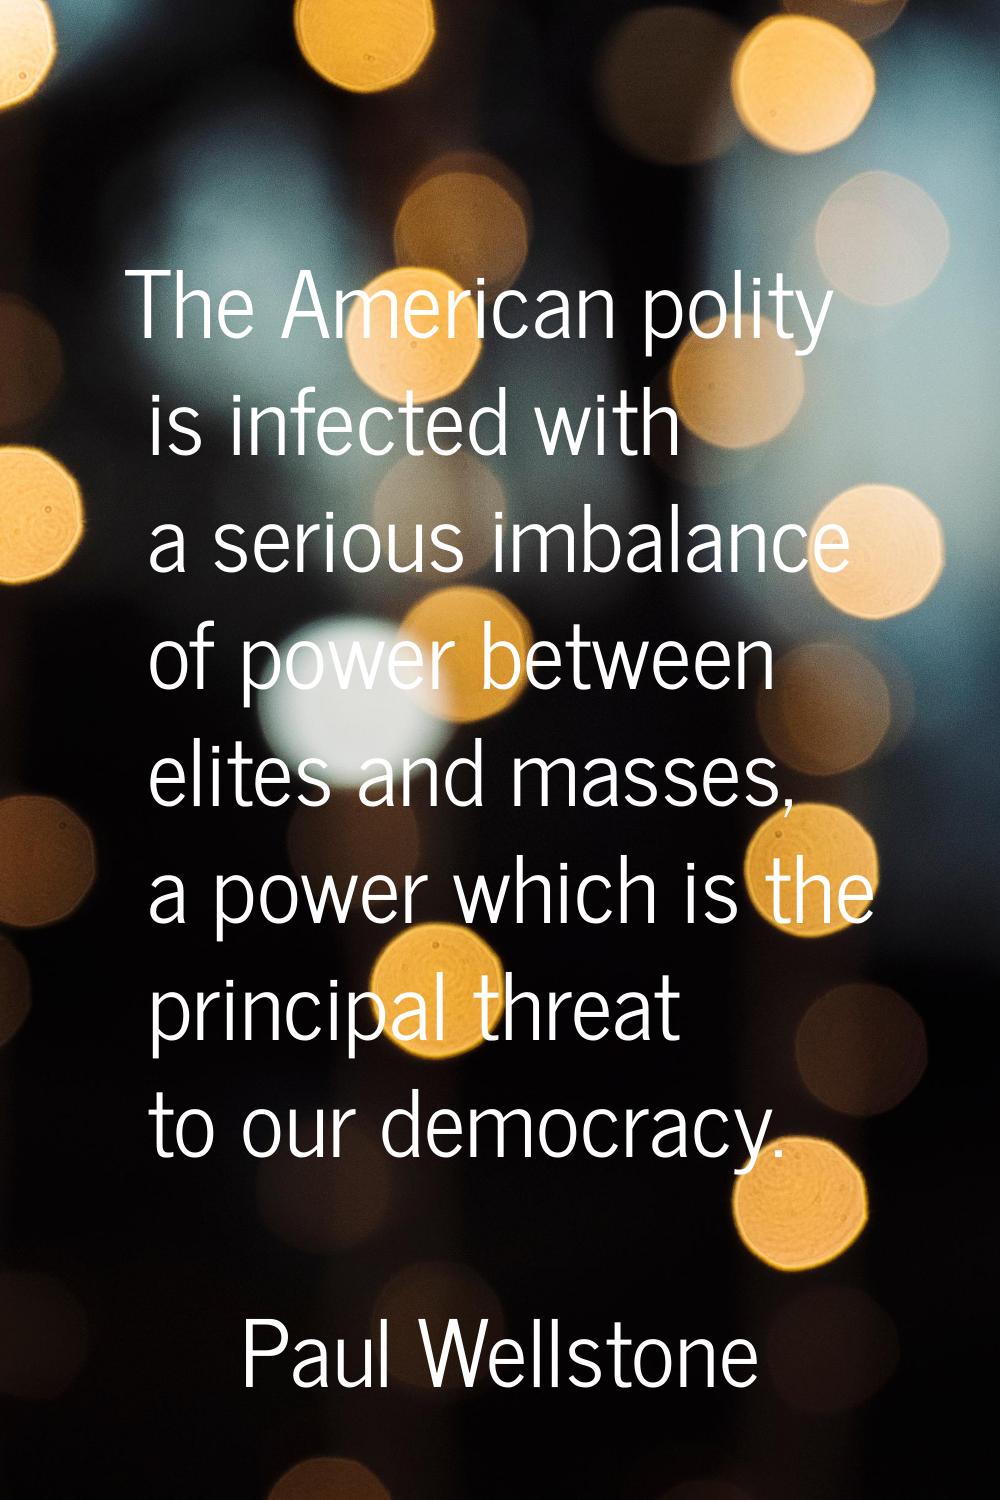 The American polity is infected with a serious imbalance of power between elites and masses, a powe